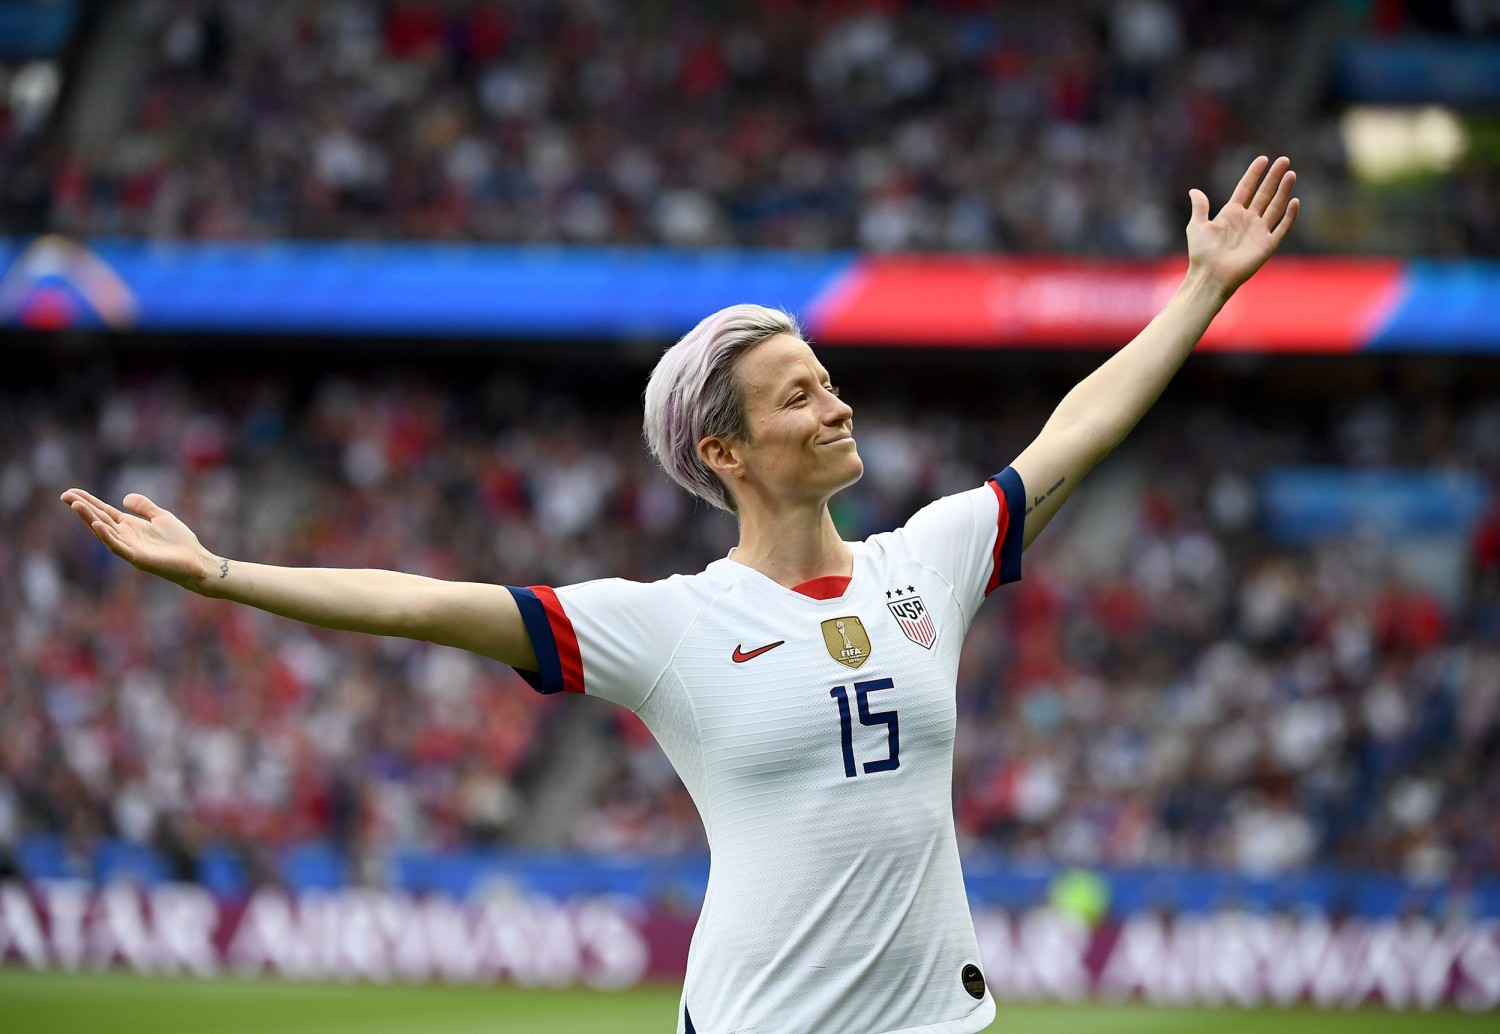 The Best Female Soccer Players of All Time